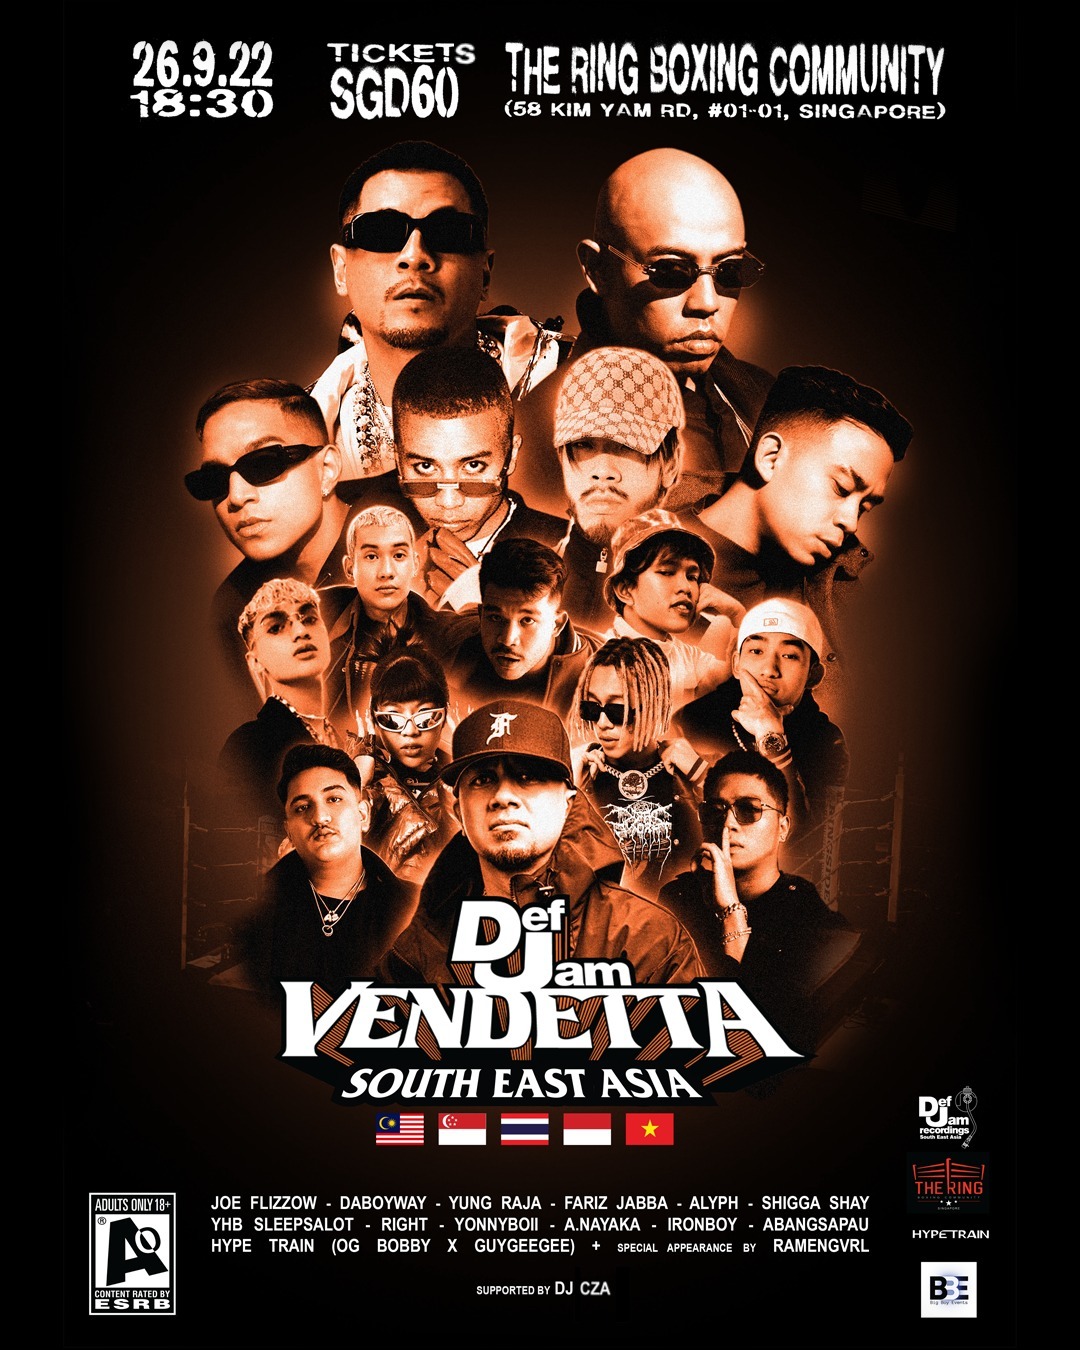 Def Jam Vendetta celebrates Hip Hop from the region | LIFTED Asia